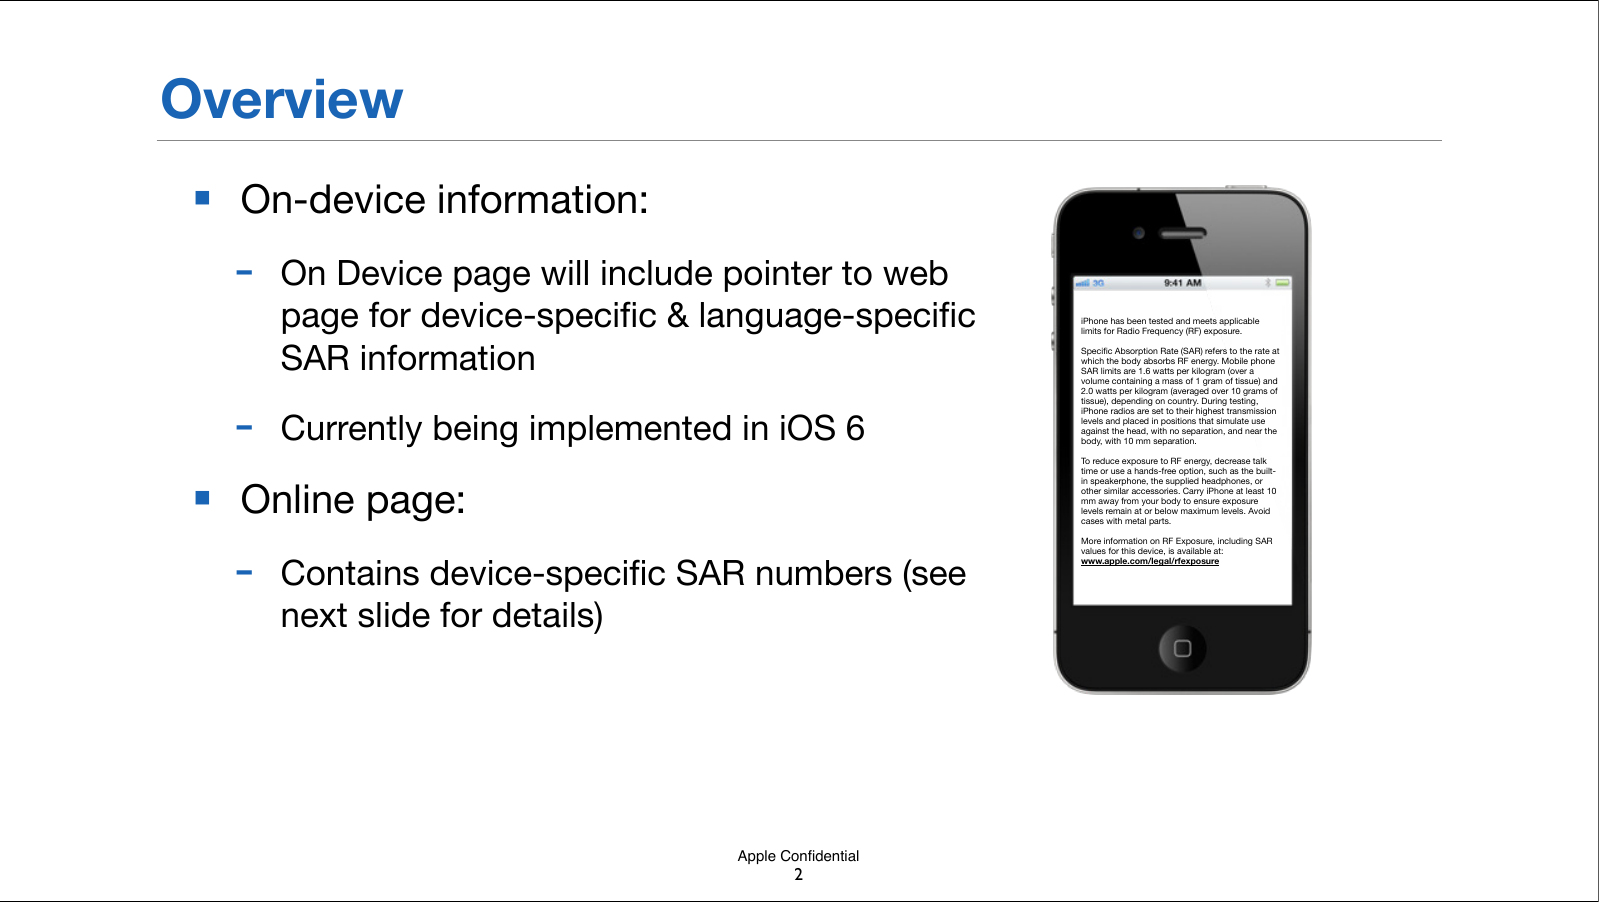 Apple Conﬁdential■On-device information:-On Device page will include pointer to web page for device-speciﬁc &amp; language-speciﬁc SAR information-Currently being implemented in iOS 6■Online page: -Contains device-speciﬁc SAR numbers (see next slide for details)OverviewiPhone has been tested and meets applicable limits for Radio Frequency (RF) exposure.Speciﬁc Absorption Rate (SAR) refers to the rate at which the body absorbs RF energy. Mobile phone SAR limits are 1.6 watts per kilogram (over a volume containing a mass of 1 gram of tissue) and 2.0 watts per kilogram (averaged over 10 grams of tissue), depending on country. During testing, iPhone radios are set to their highest transmission levels and placed in positions that simulate use against the head, with no separation, and near the body, with 10 mm separation.To reduce exposure to RF energy, decrease talk time or use a hands-free option, such as the built-in speakerphone, the supplied headphones, or other similar accessories.!Carry iPhone at least 10 mm away from your body to ensure exposure levels remain at or below maximum levels. Avoid cases with metal parts.More information on RF Exposure, including SAR values for this device, is available at: www.apple.com/legal/rfexposure2